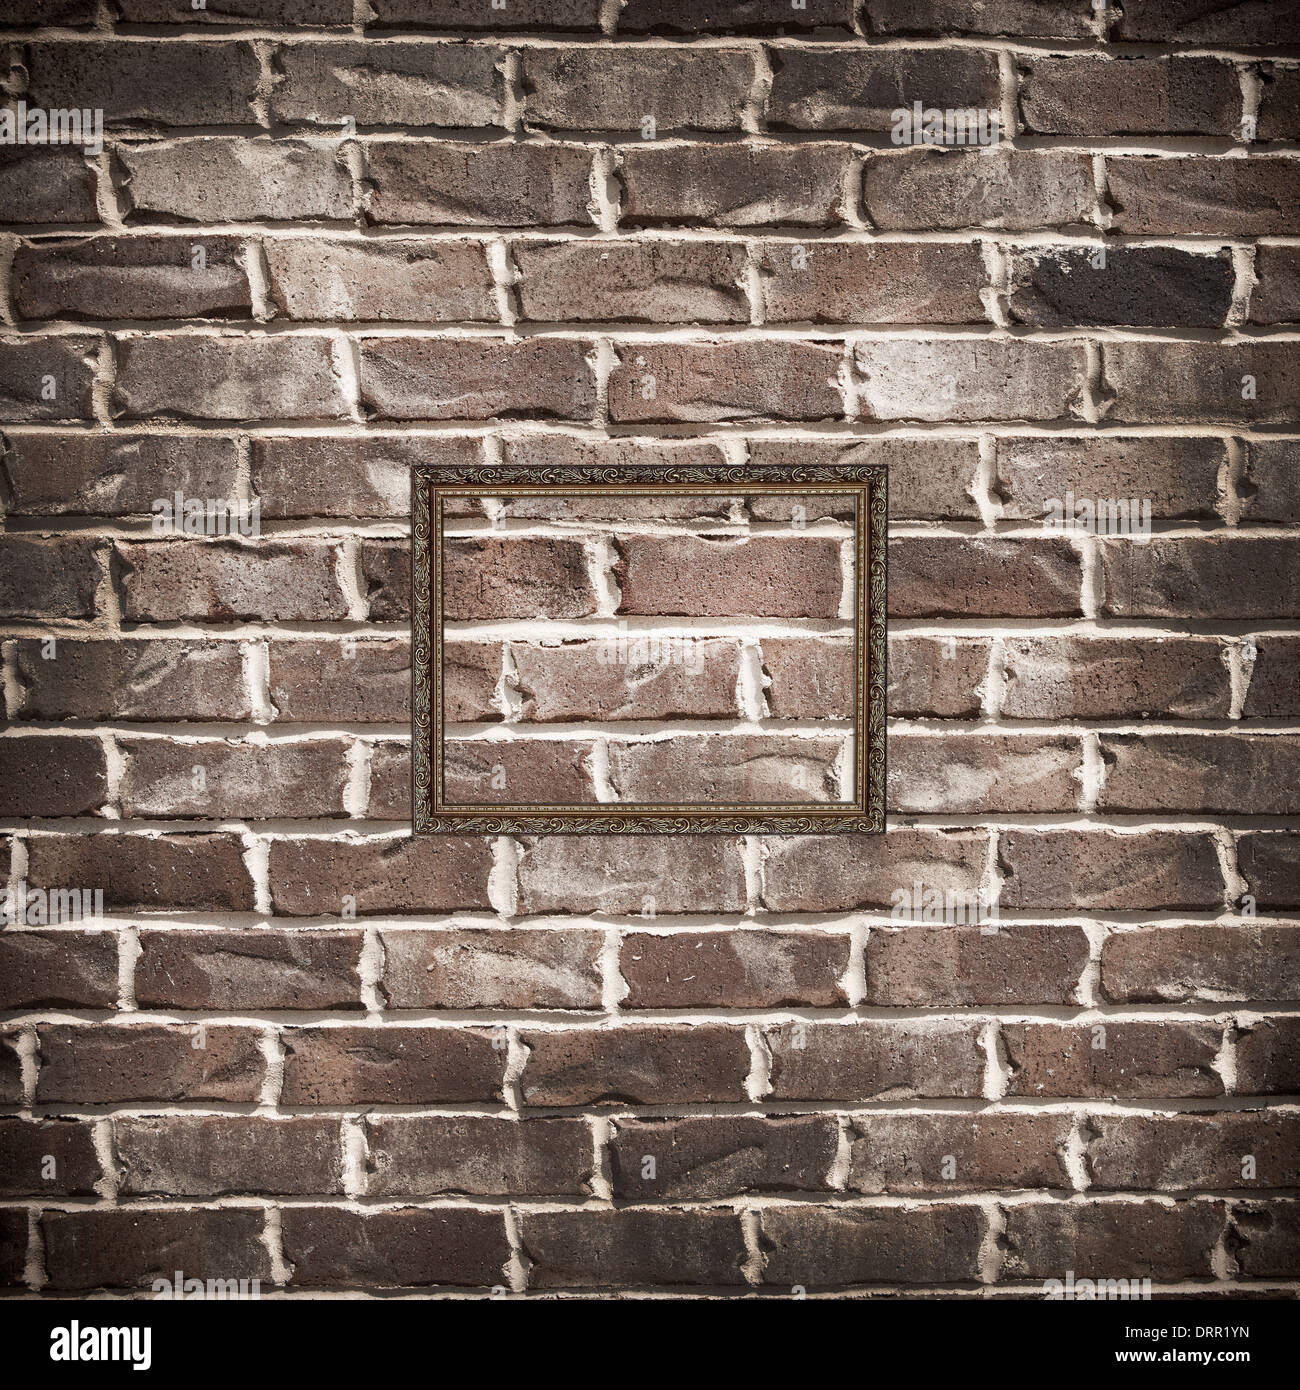 Vintage Empty Frame On White Wall Stock Photo, Picture and Royalty Free  Image. Image 23246248.